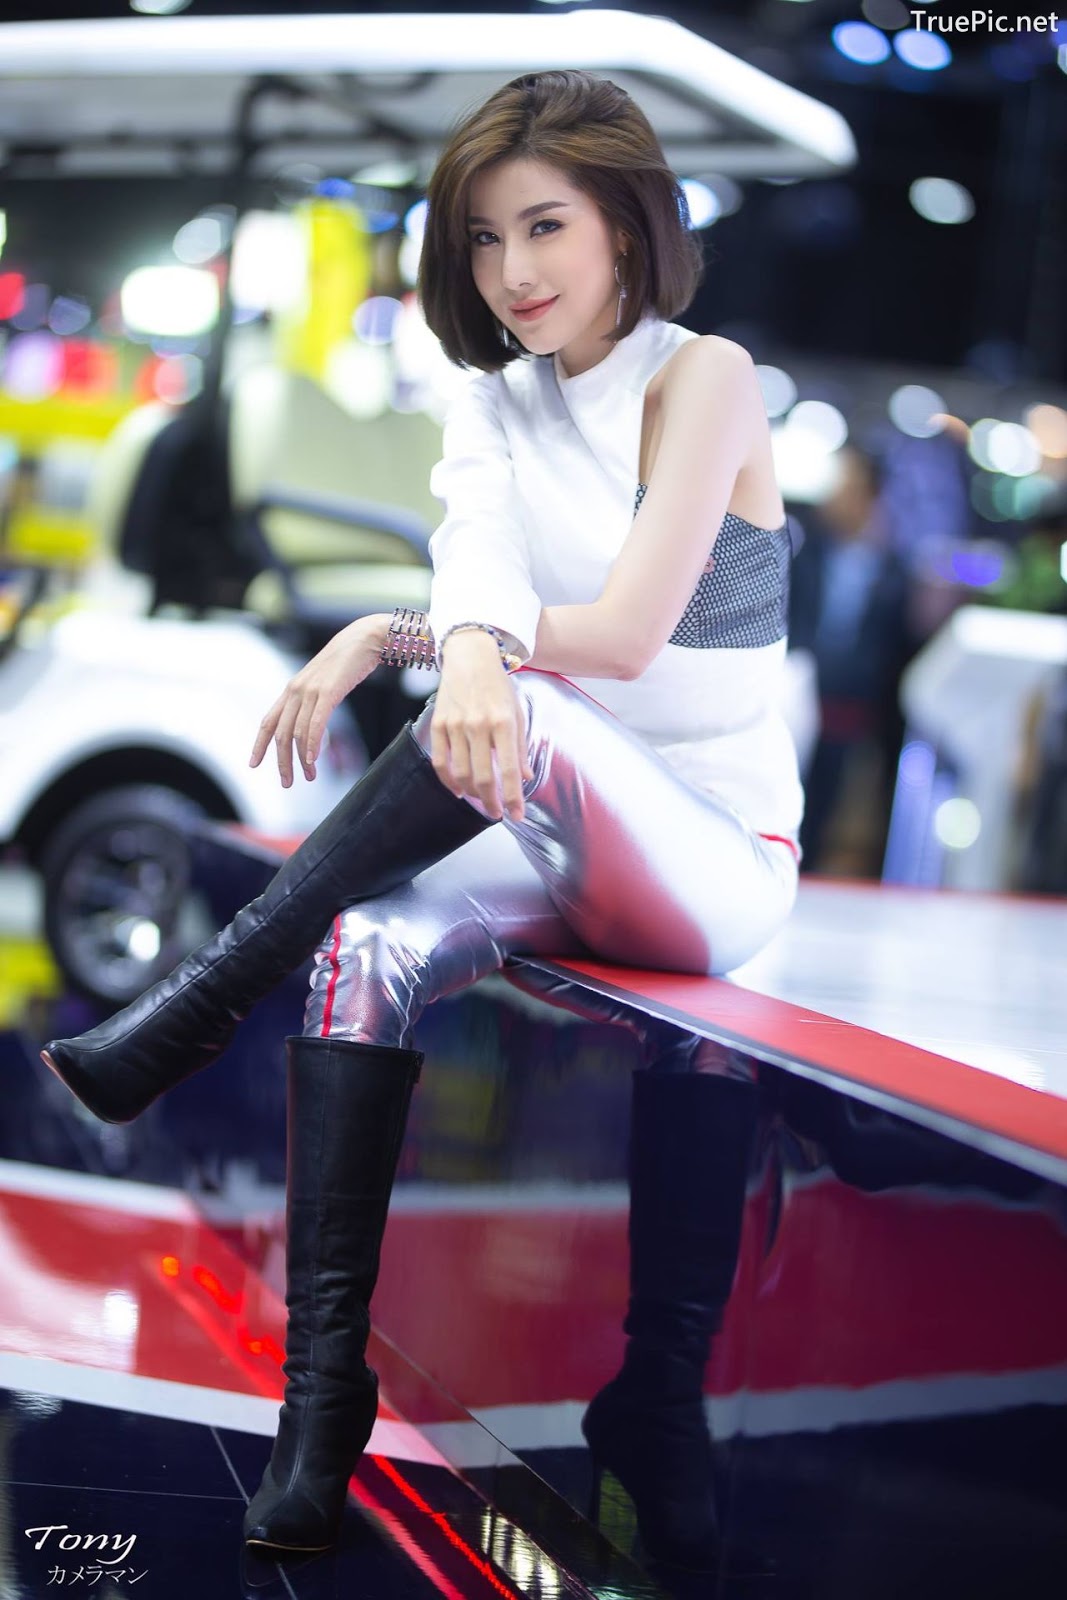 Image-Thailand-Hot-Model-Thai-Racing-Girl-At-Motor-Expo-2018-TruePic.net- Picture-62